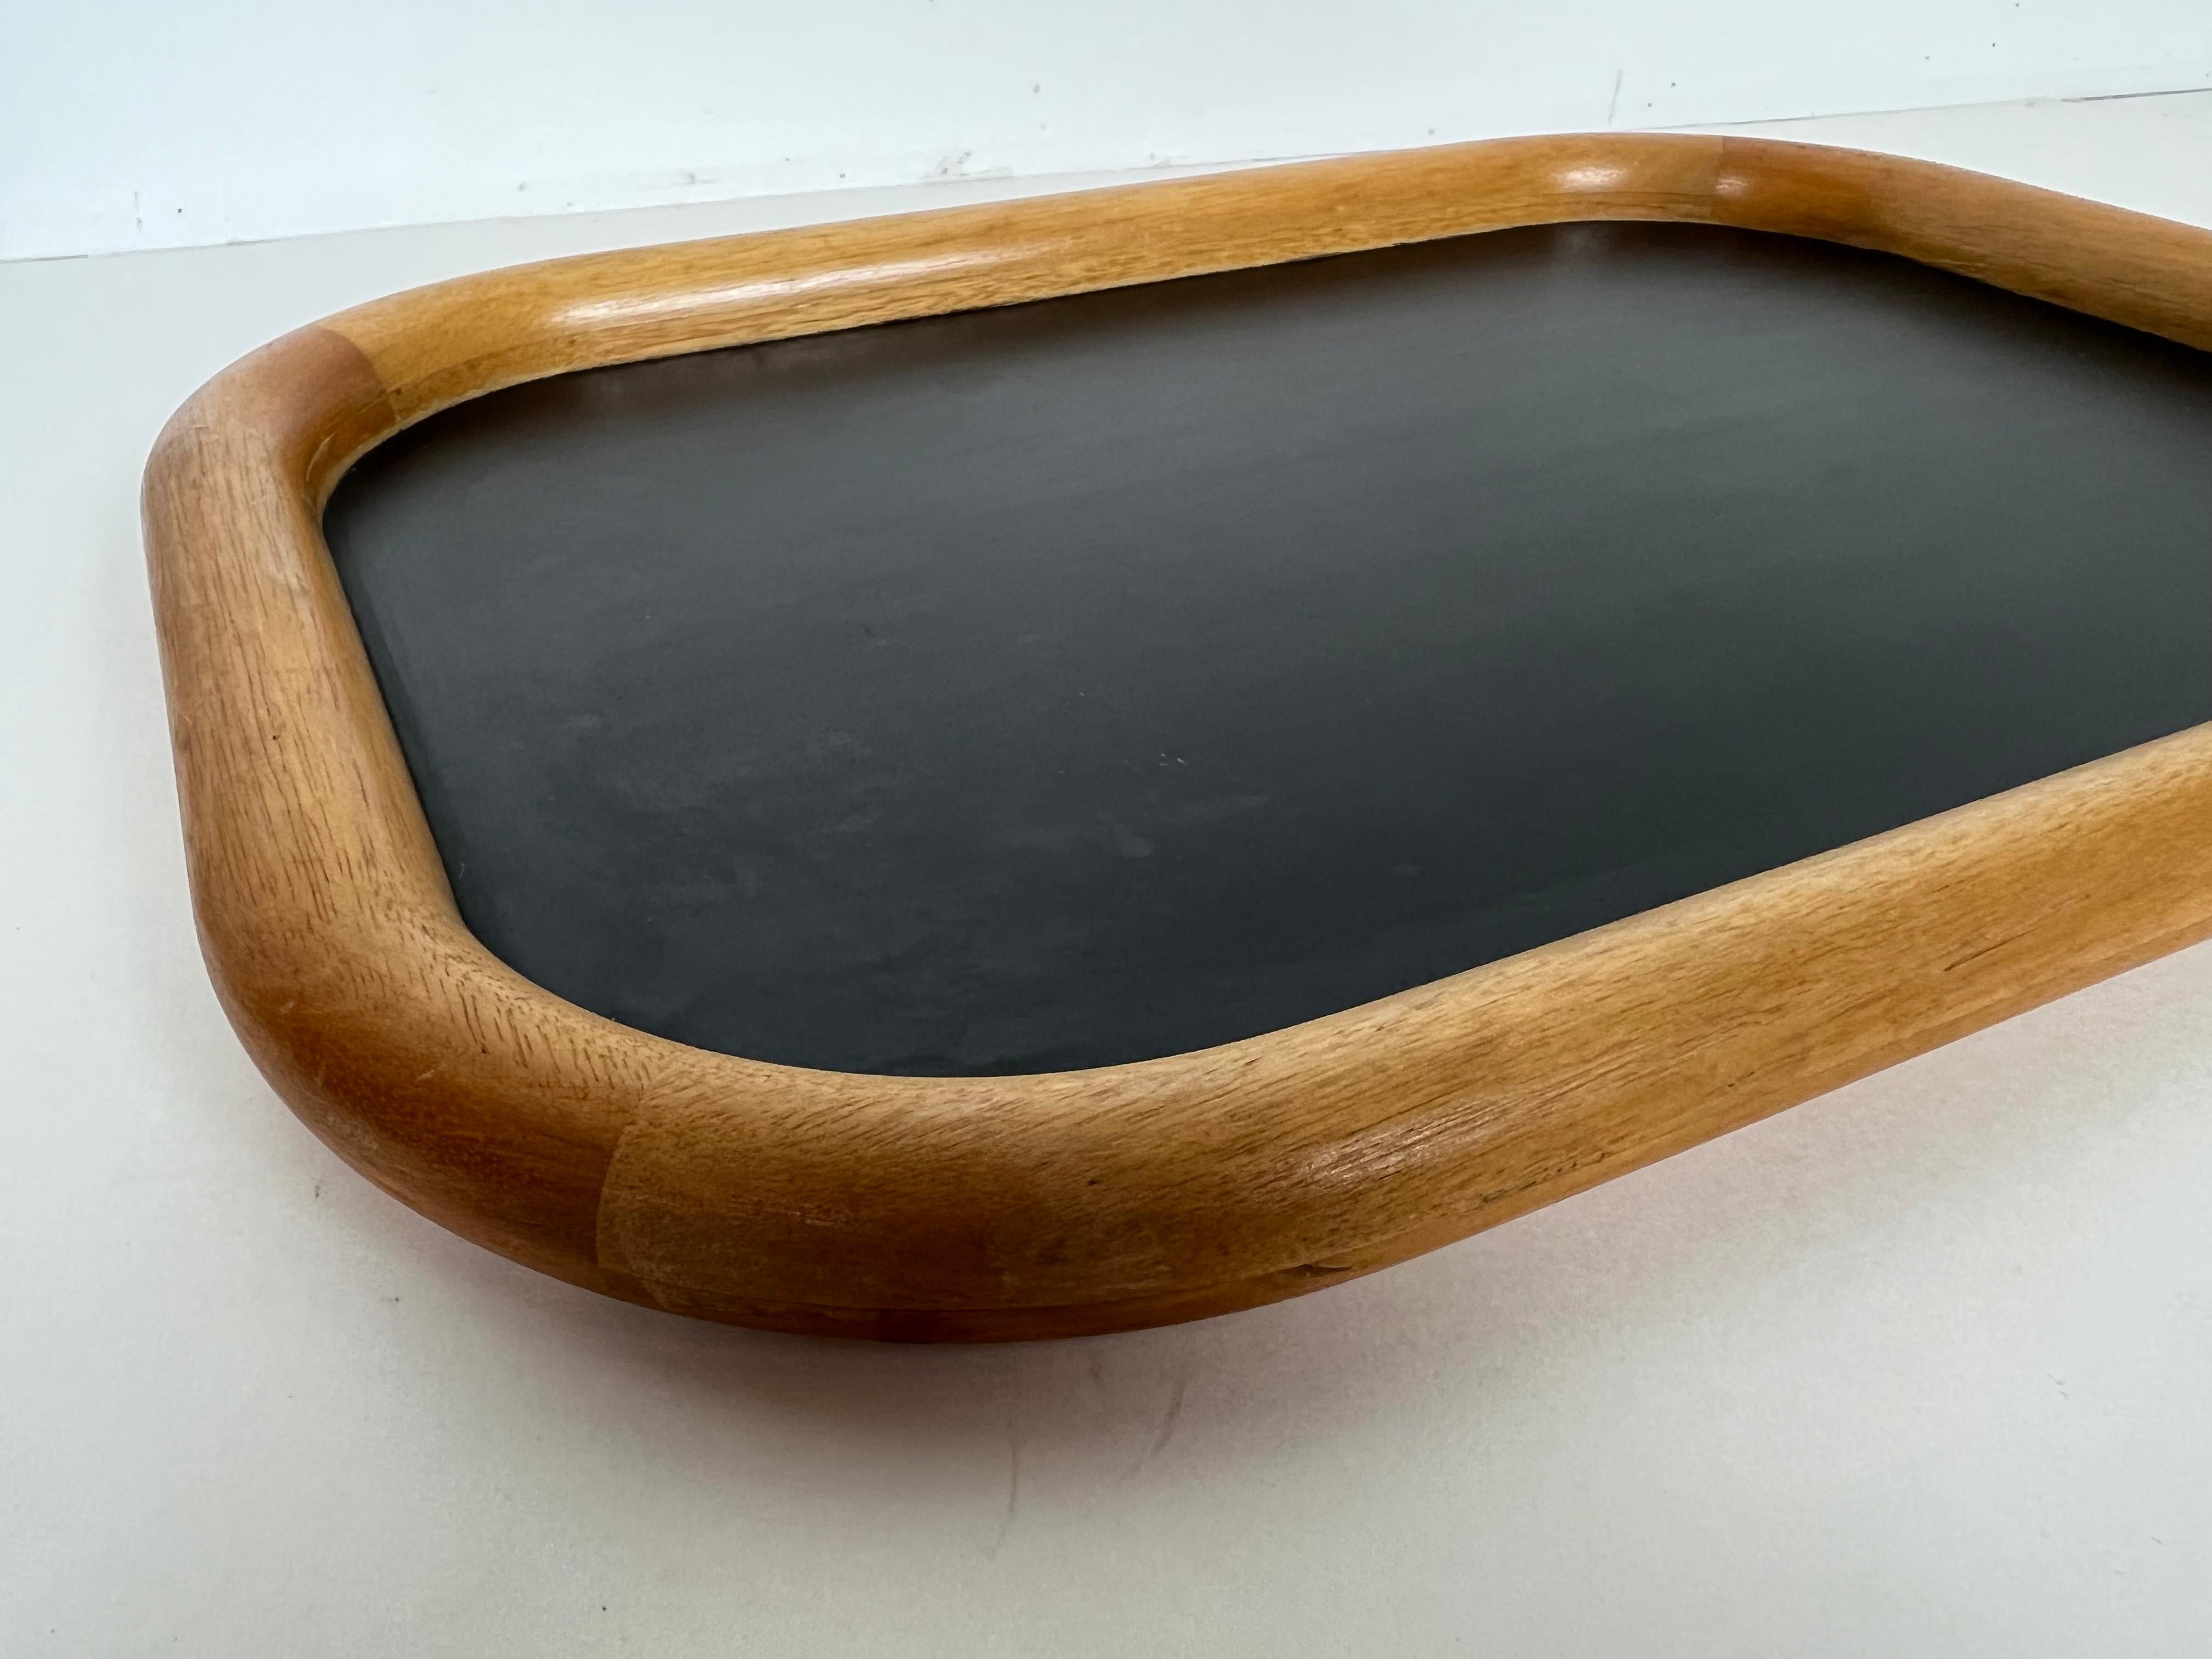 Vintage bentwood serving tray constructed of Kuala wood and a black laminate material by Ernest Sohn.

Manufacturer: Ernest Sohn Creations

Designer: Ernest Sohn

Origin: Cleveland, Ohio. USA

Style: Mid-Century Modern

Dimensions: 18.25